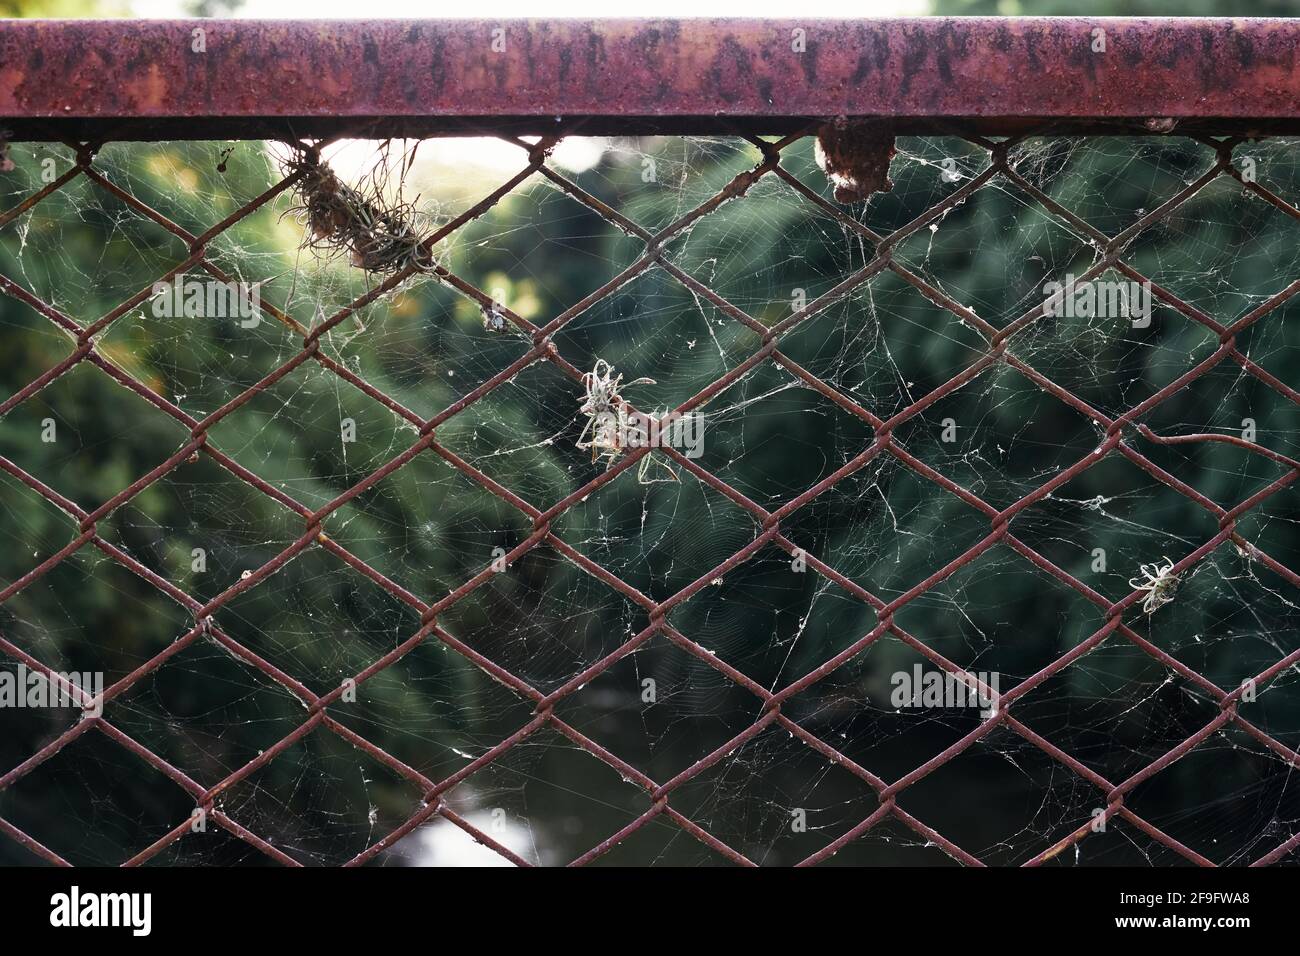 Abstract view of spider webs on fence during march spider season in Brazil Stock Photo